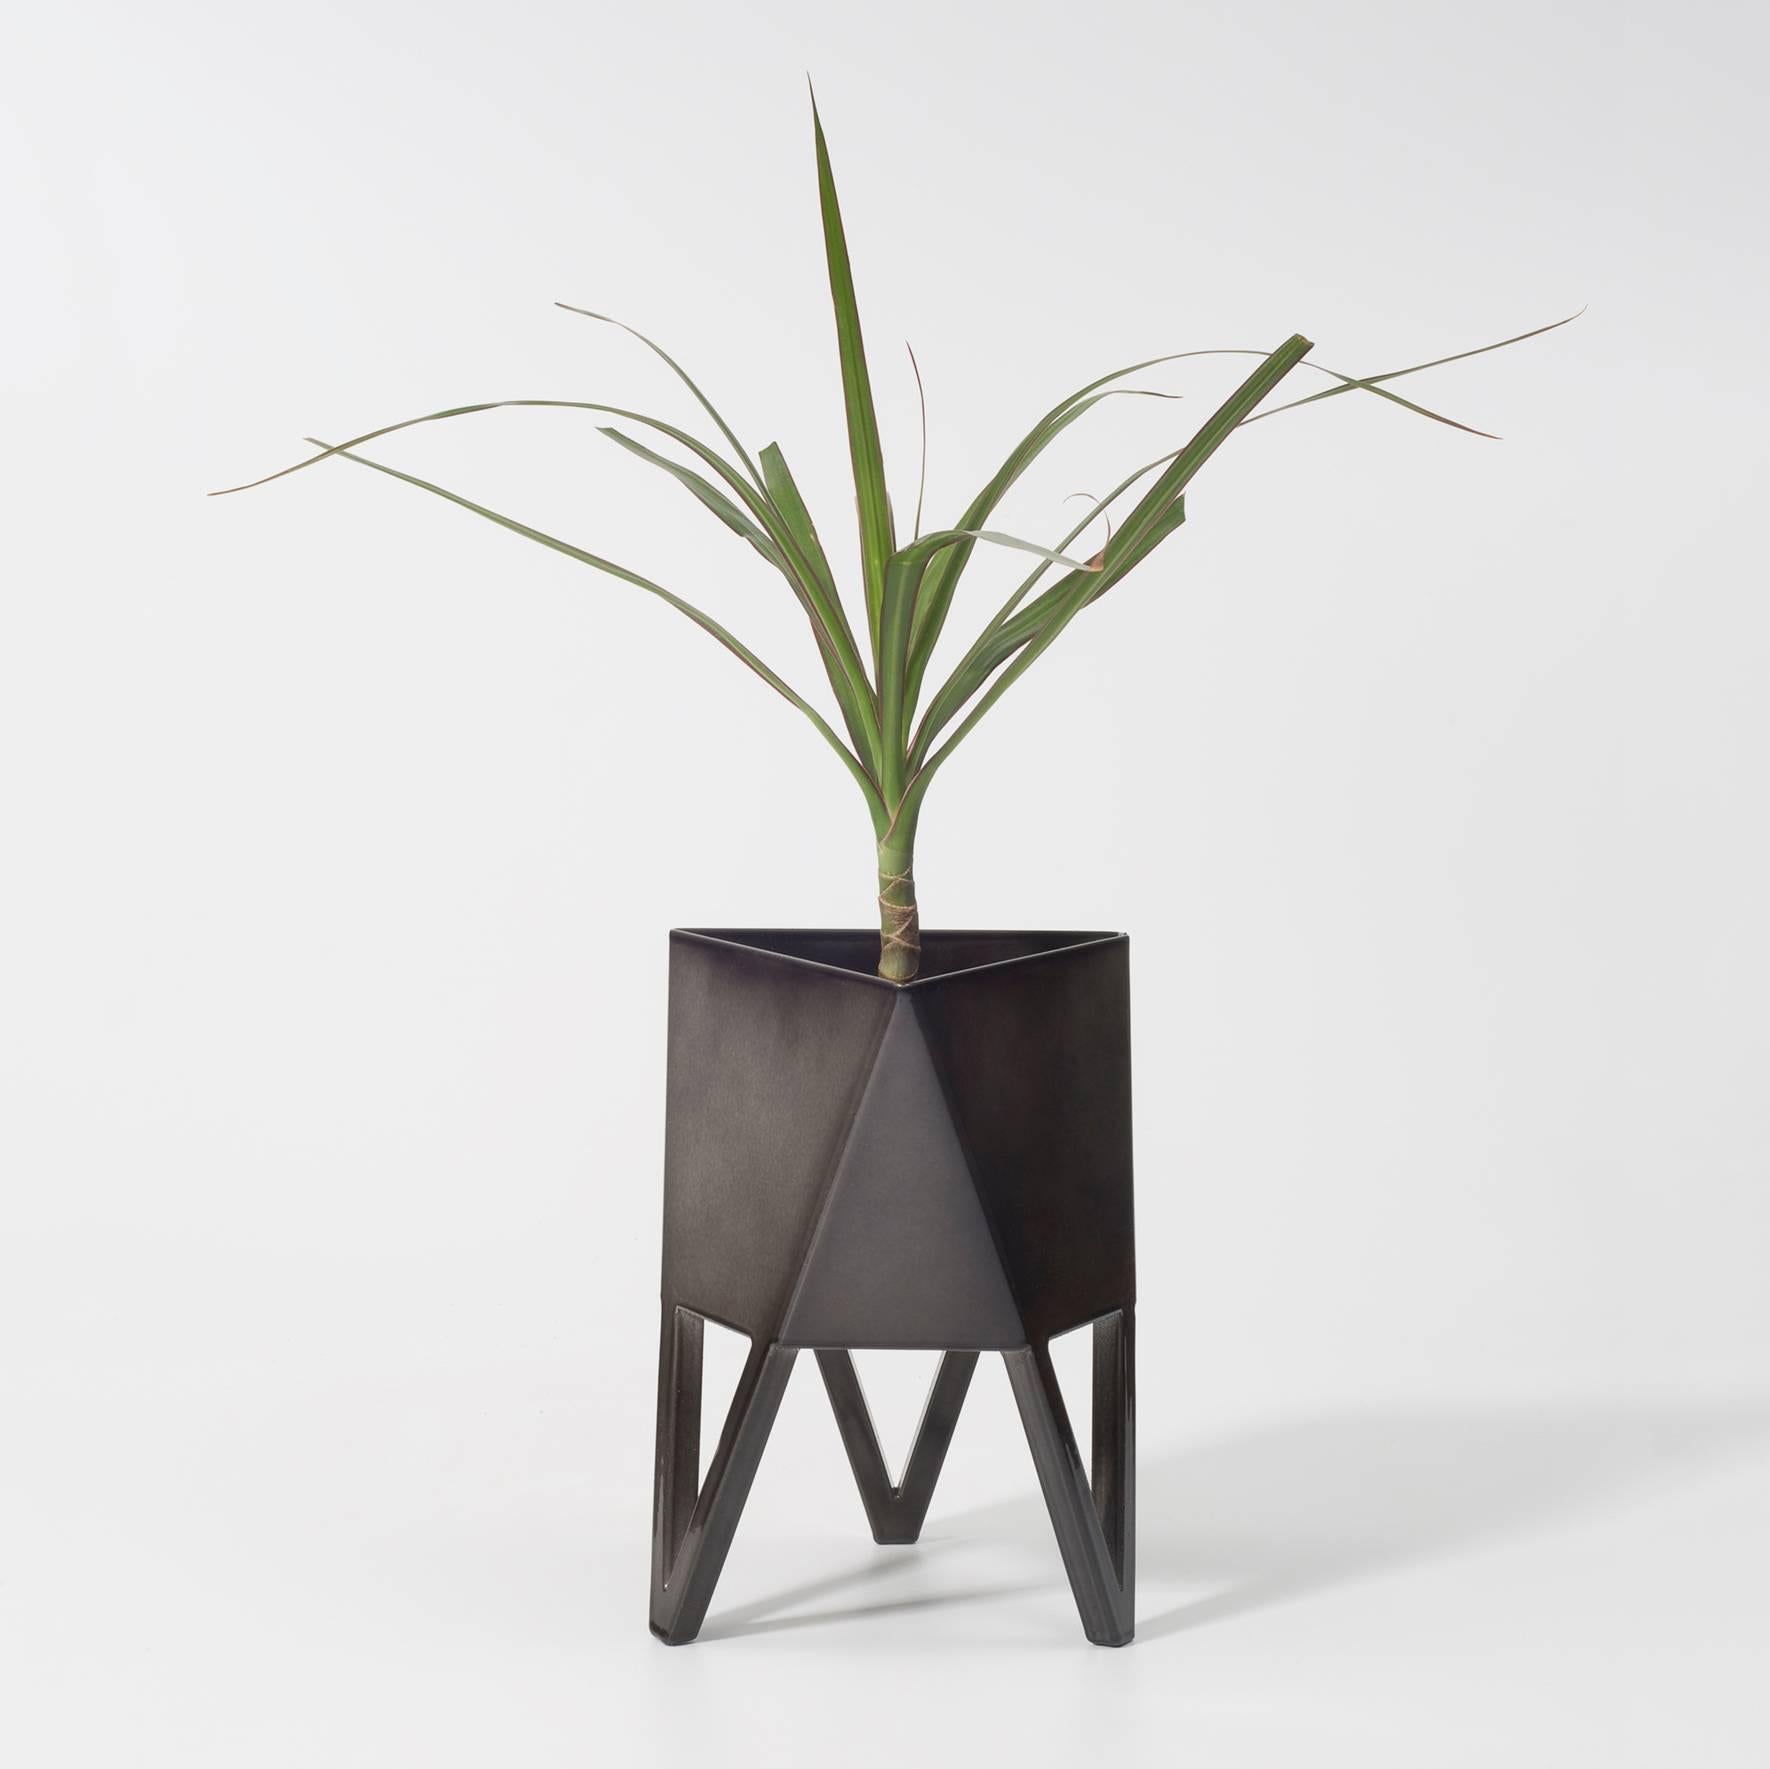 Contemporary Deca Planter in Flat Black Steel, Mini, by Force/Collide